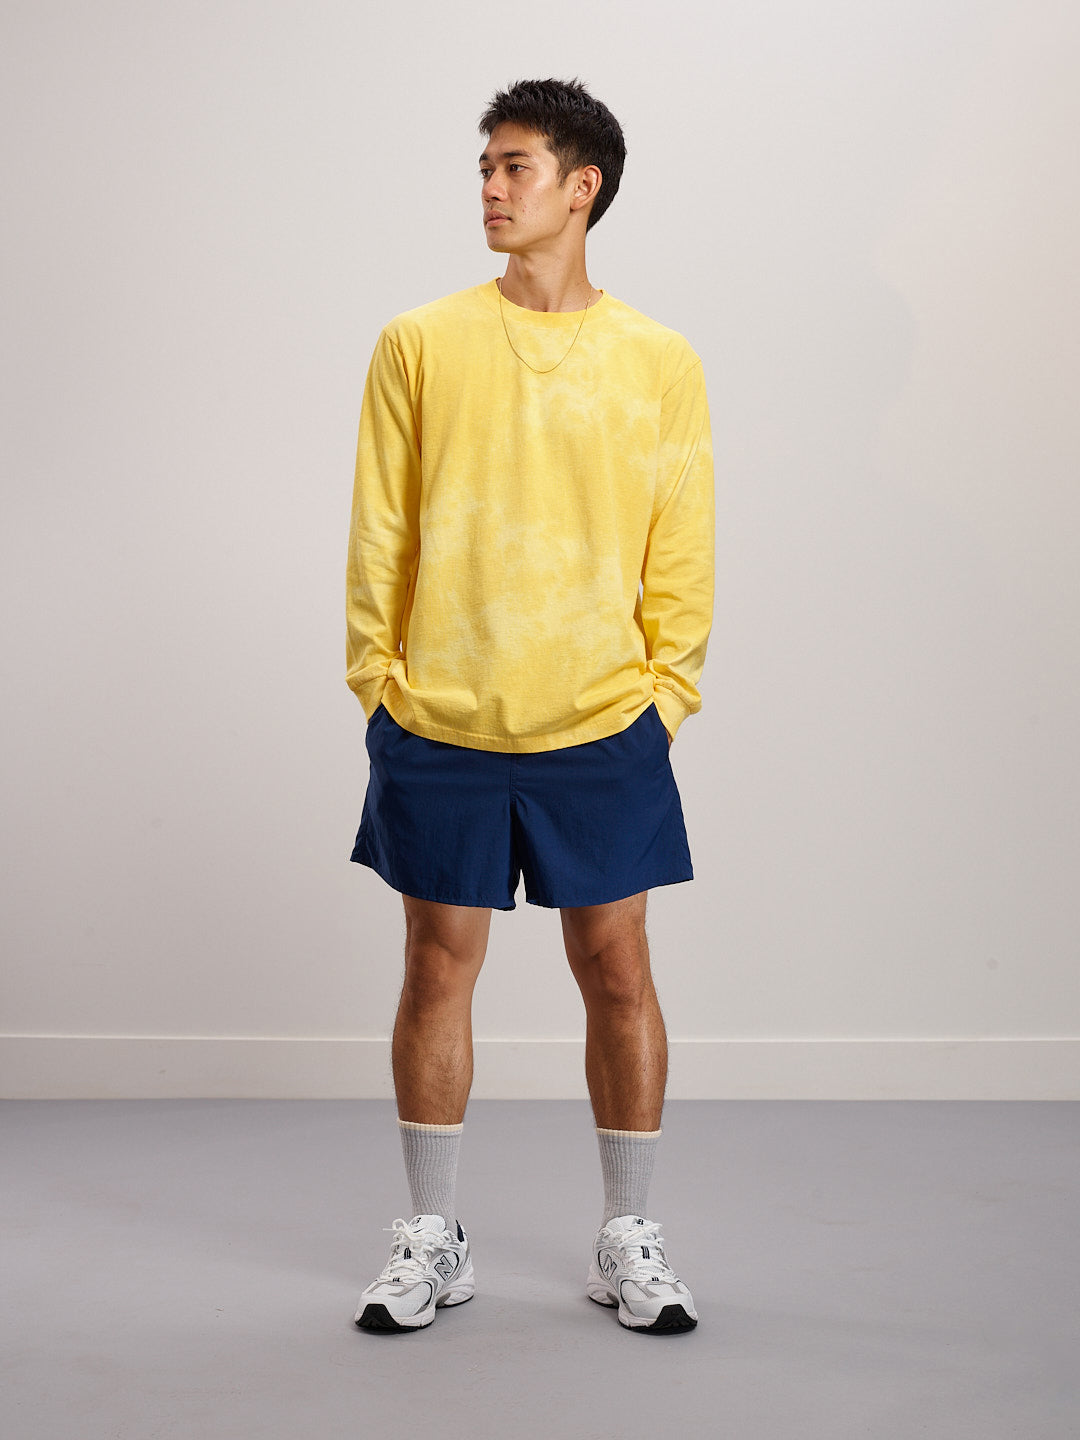 Lite Year Long Sleeve Tee - Cloudy Washed Yellow